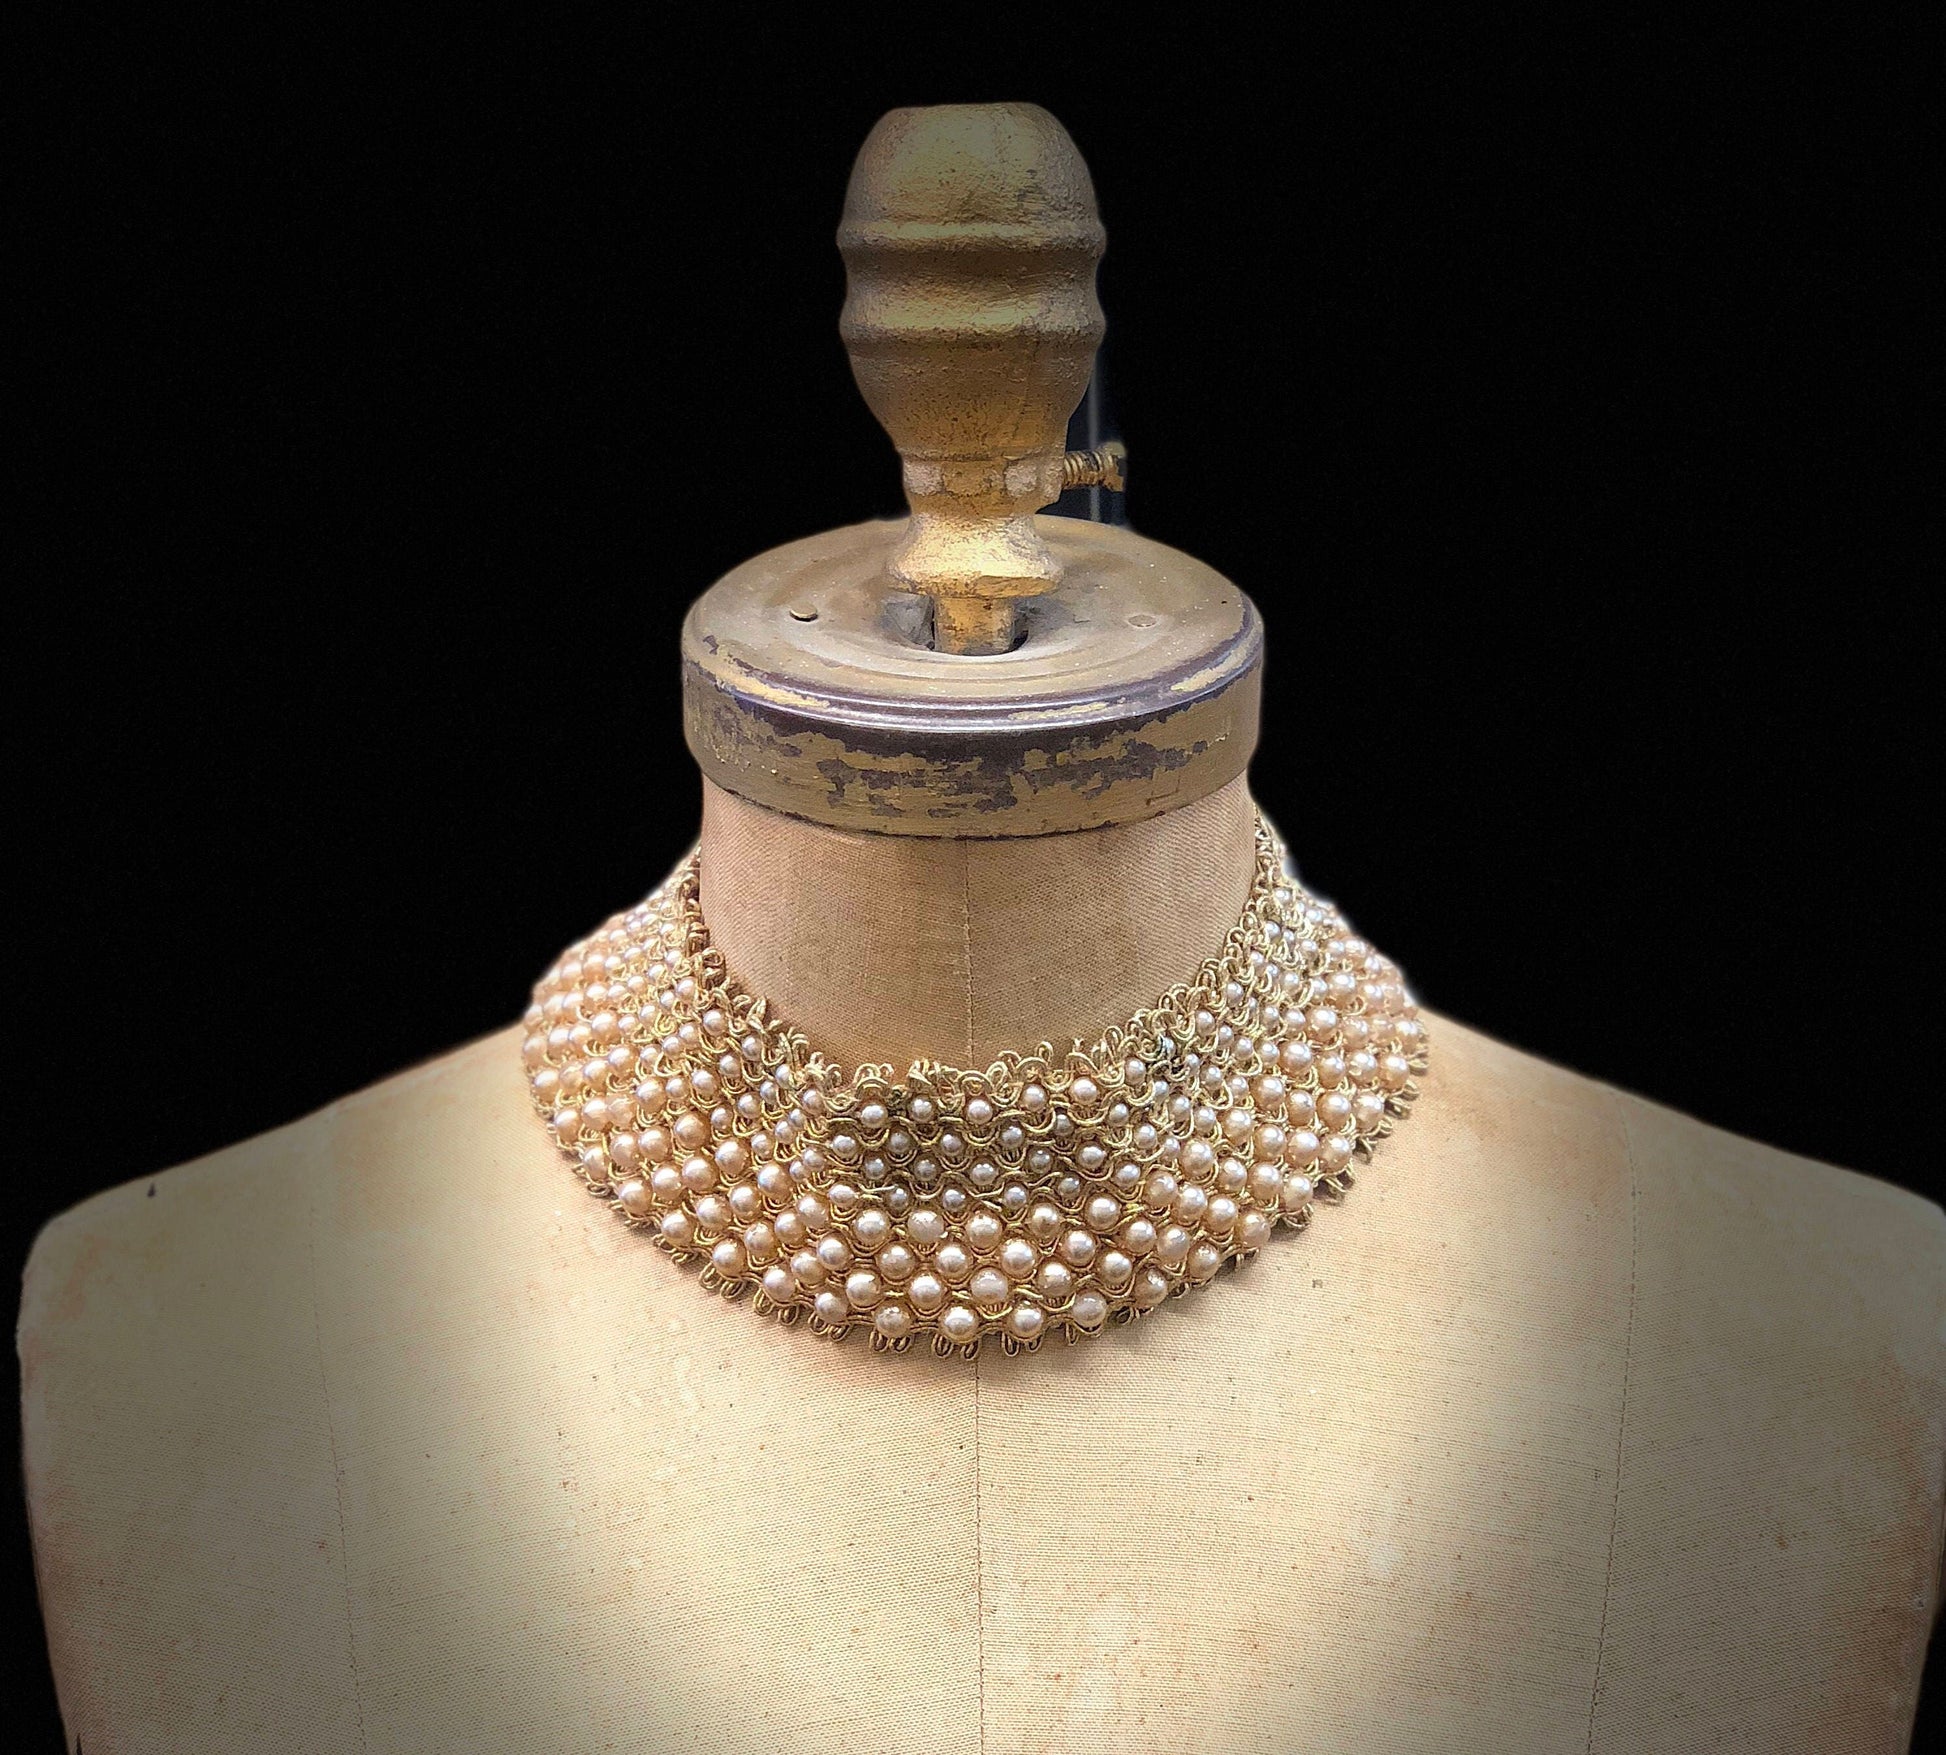 Vintage pearl and bead encrusted collar displayed on a mannequin, showcasing intricate beadwork and design reminiscent of classic fashion eras.